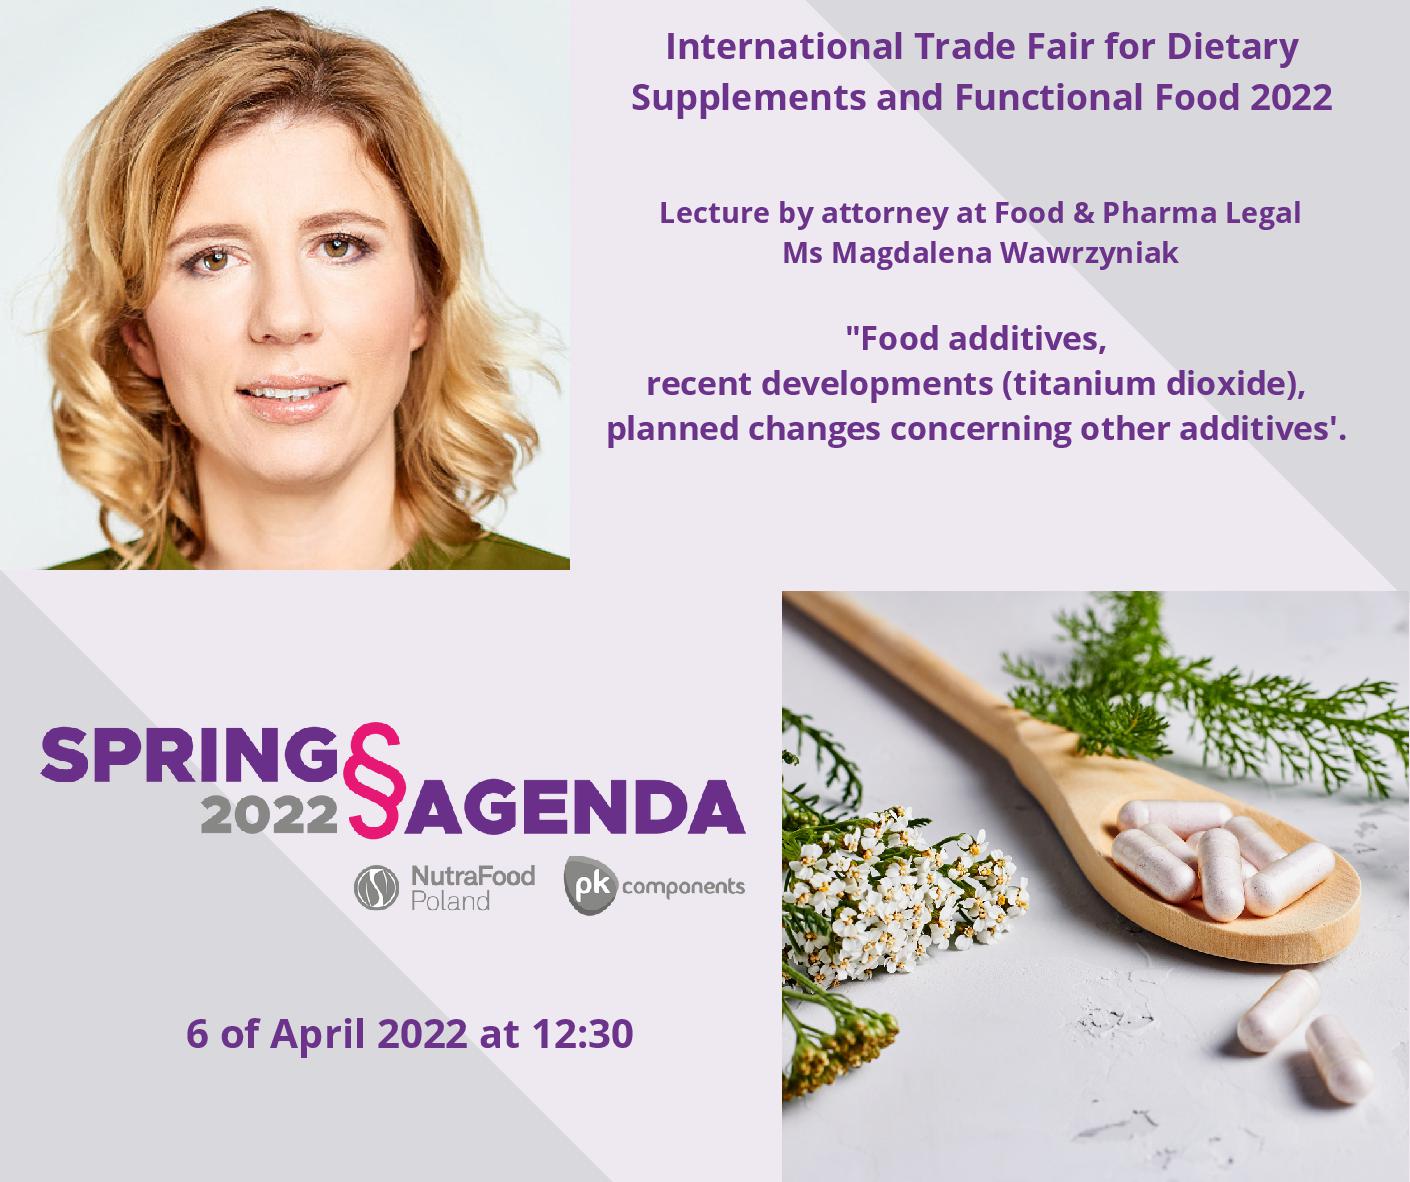 Our expert with a lecture at the International Trade Fair for Dietary Supplements and Functional Food 2022